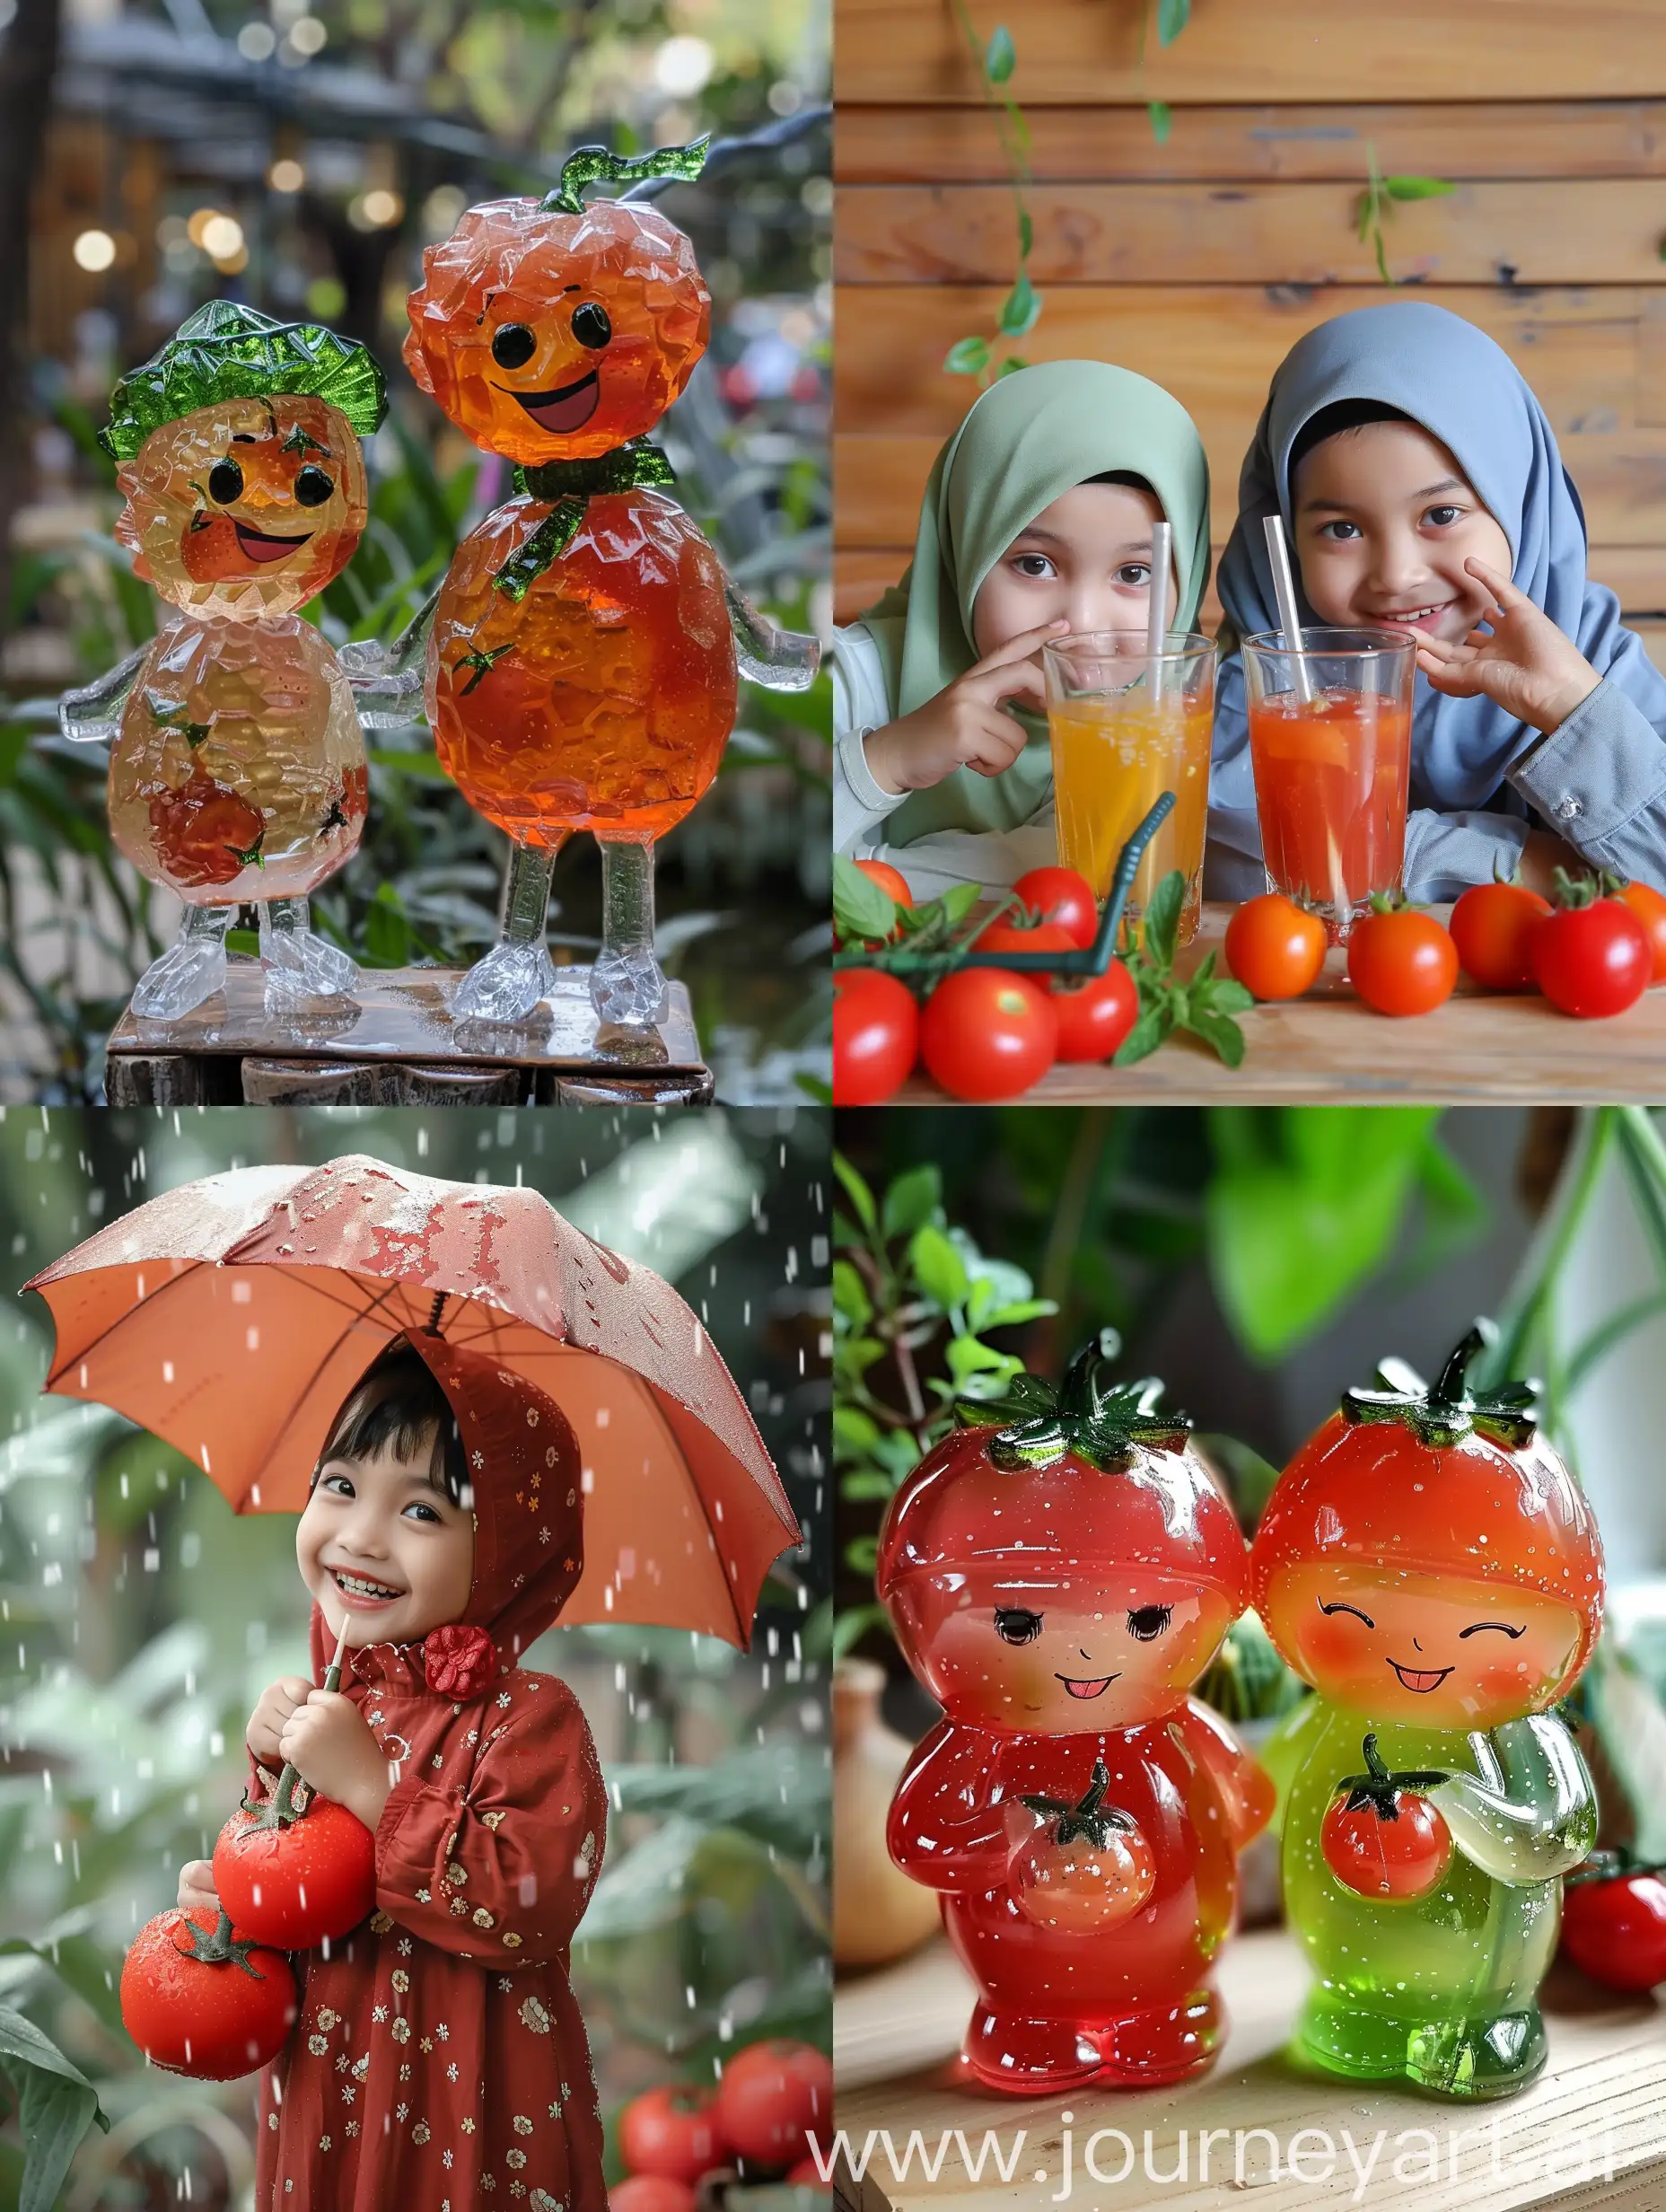 Two-Cute-Crystal-Glass-Sculptures-of-Tomato-and-Mangosteen-Children-Holding-Hands-in-Natural-Sunlit-Scene